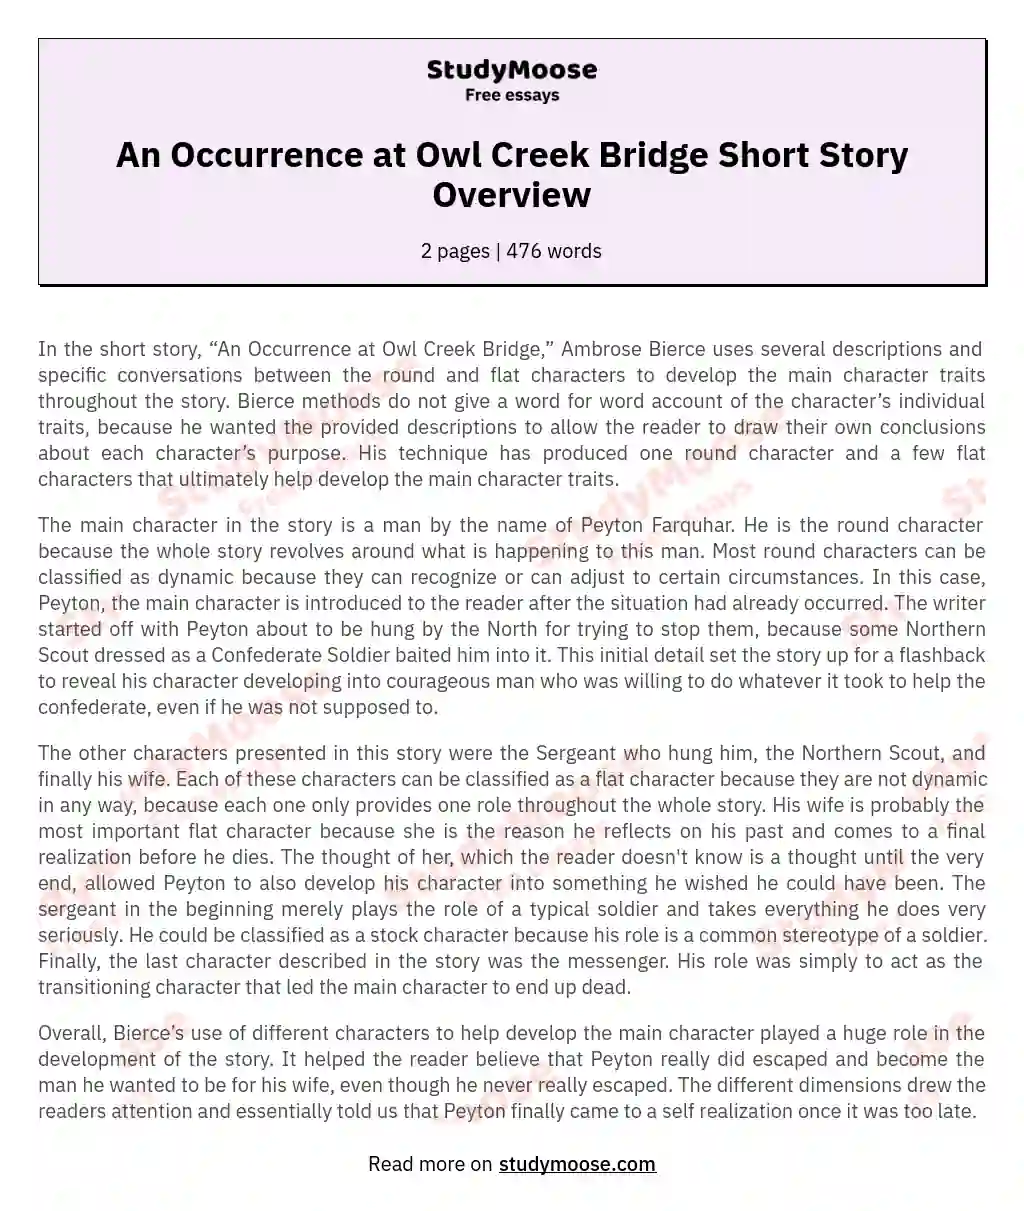 An Occurrence at Owl Creek Bridge Short Story Overview